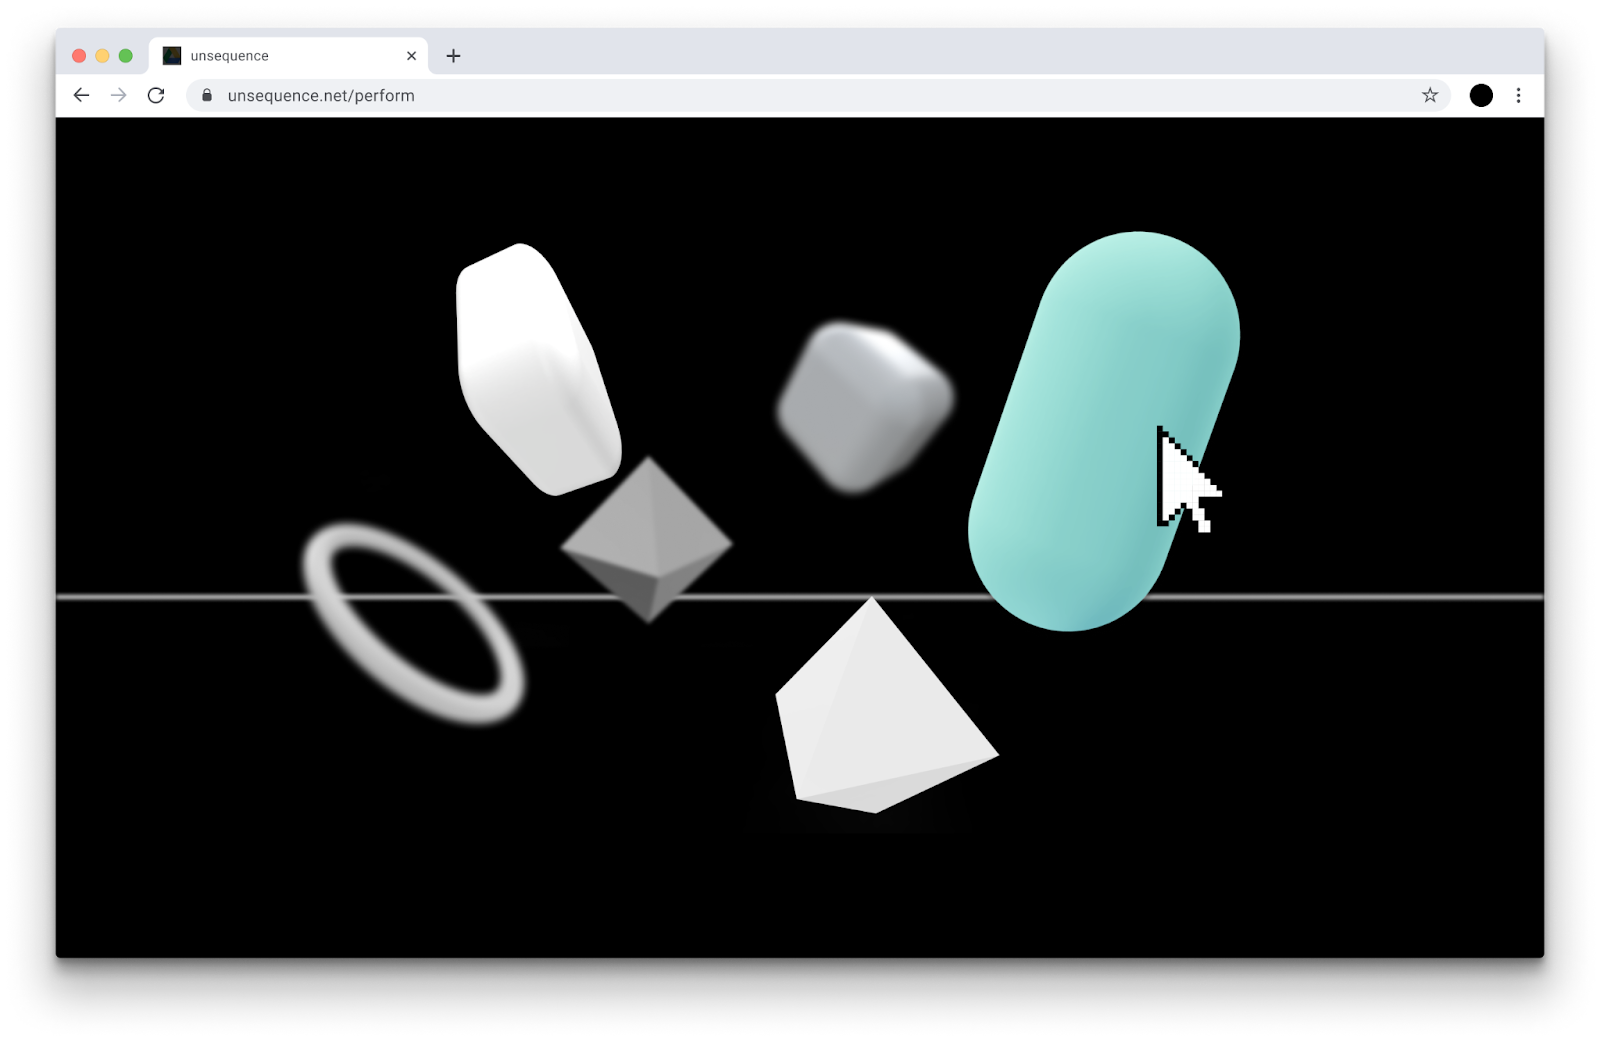 screen capture of unsequence.net where you have multiple 3d objects, representing each sound from the audience, floating around a black screen